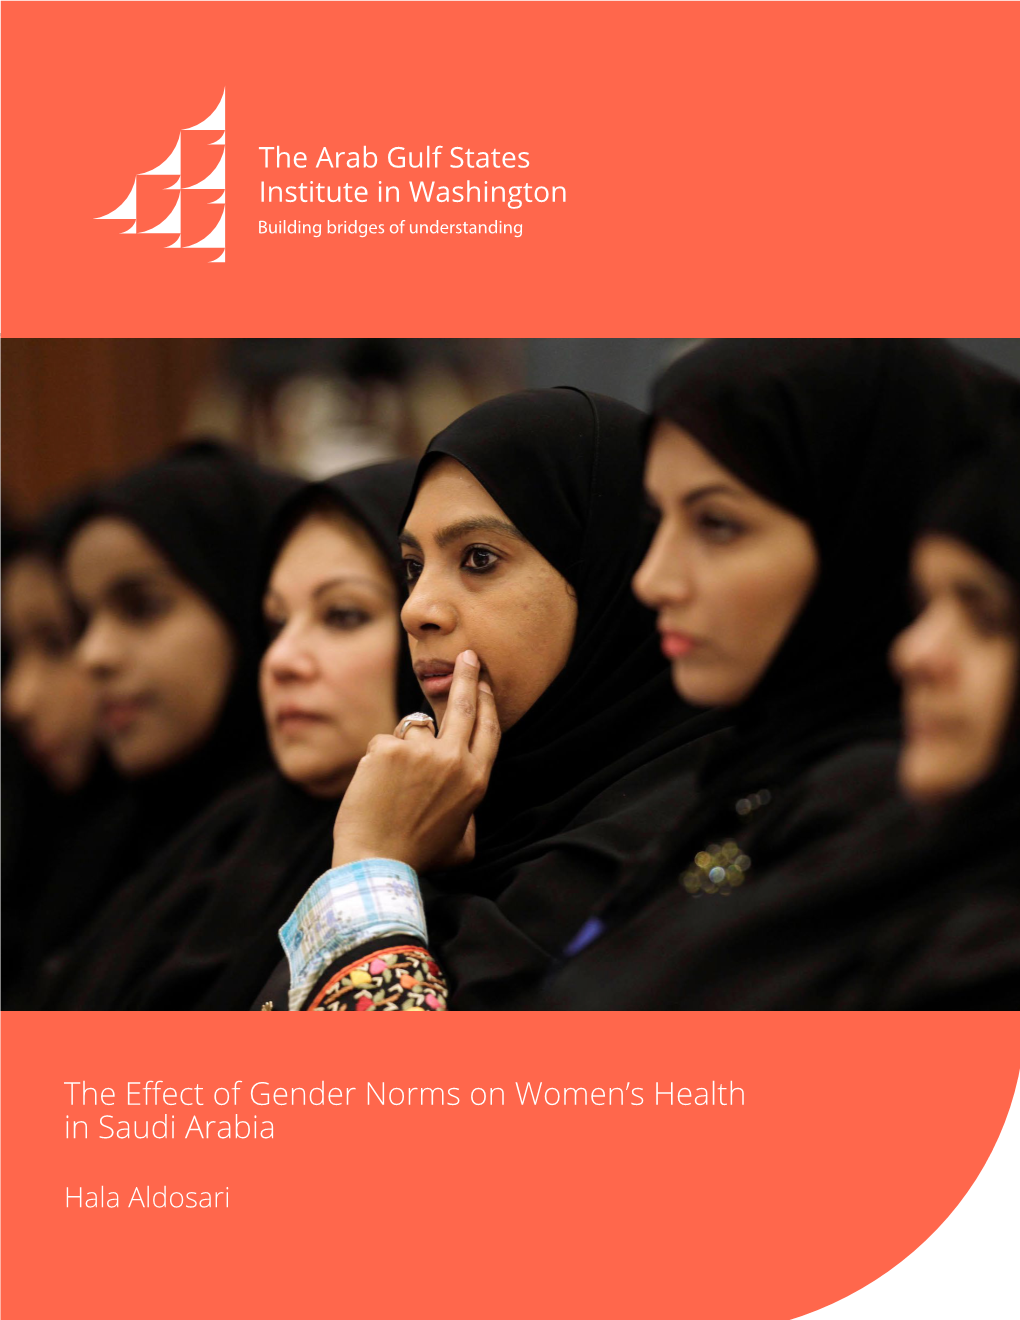 The Effect of Gender Norms on Women's Health in Saudi Arabia